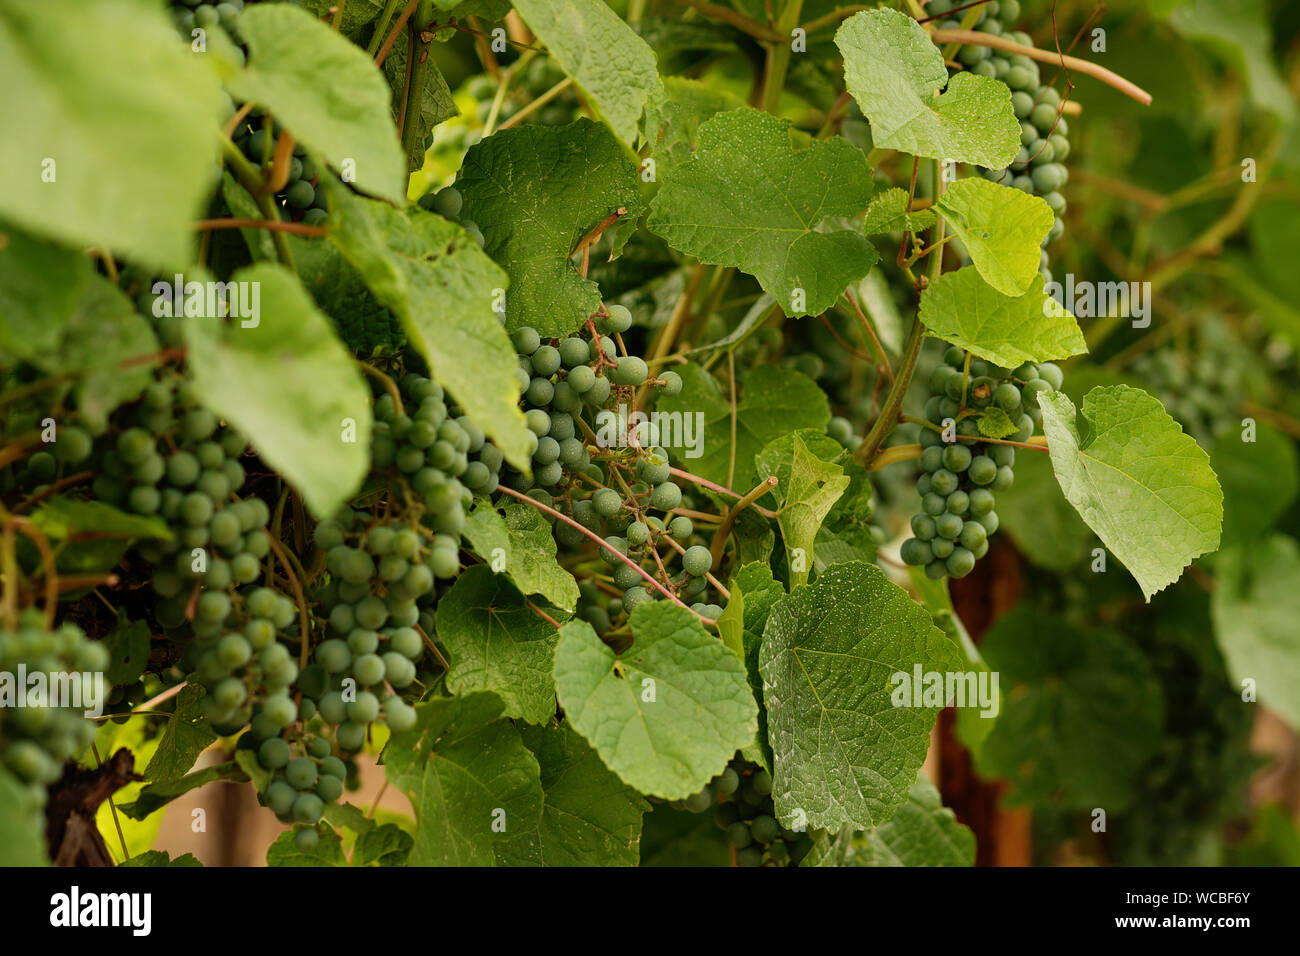 Green grapes growing on grape vines. Unripe, young wine grapes in vineyard, early summer. Bunch of green unripe grapes with leaves. Young branch of gr Stock Photo